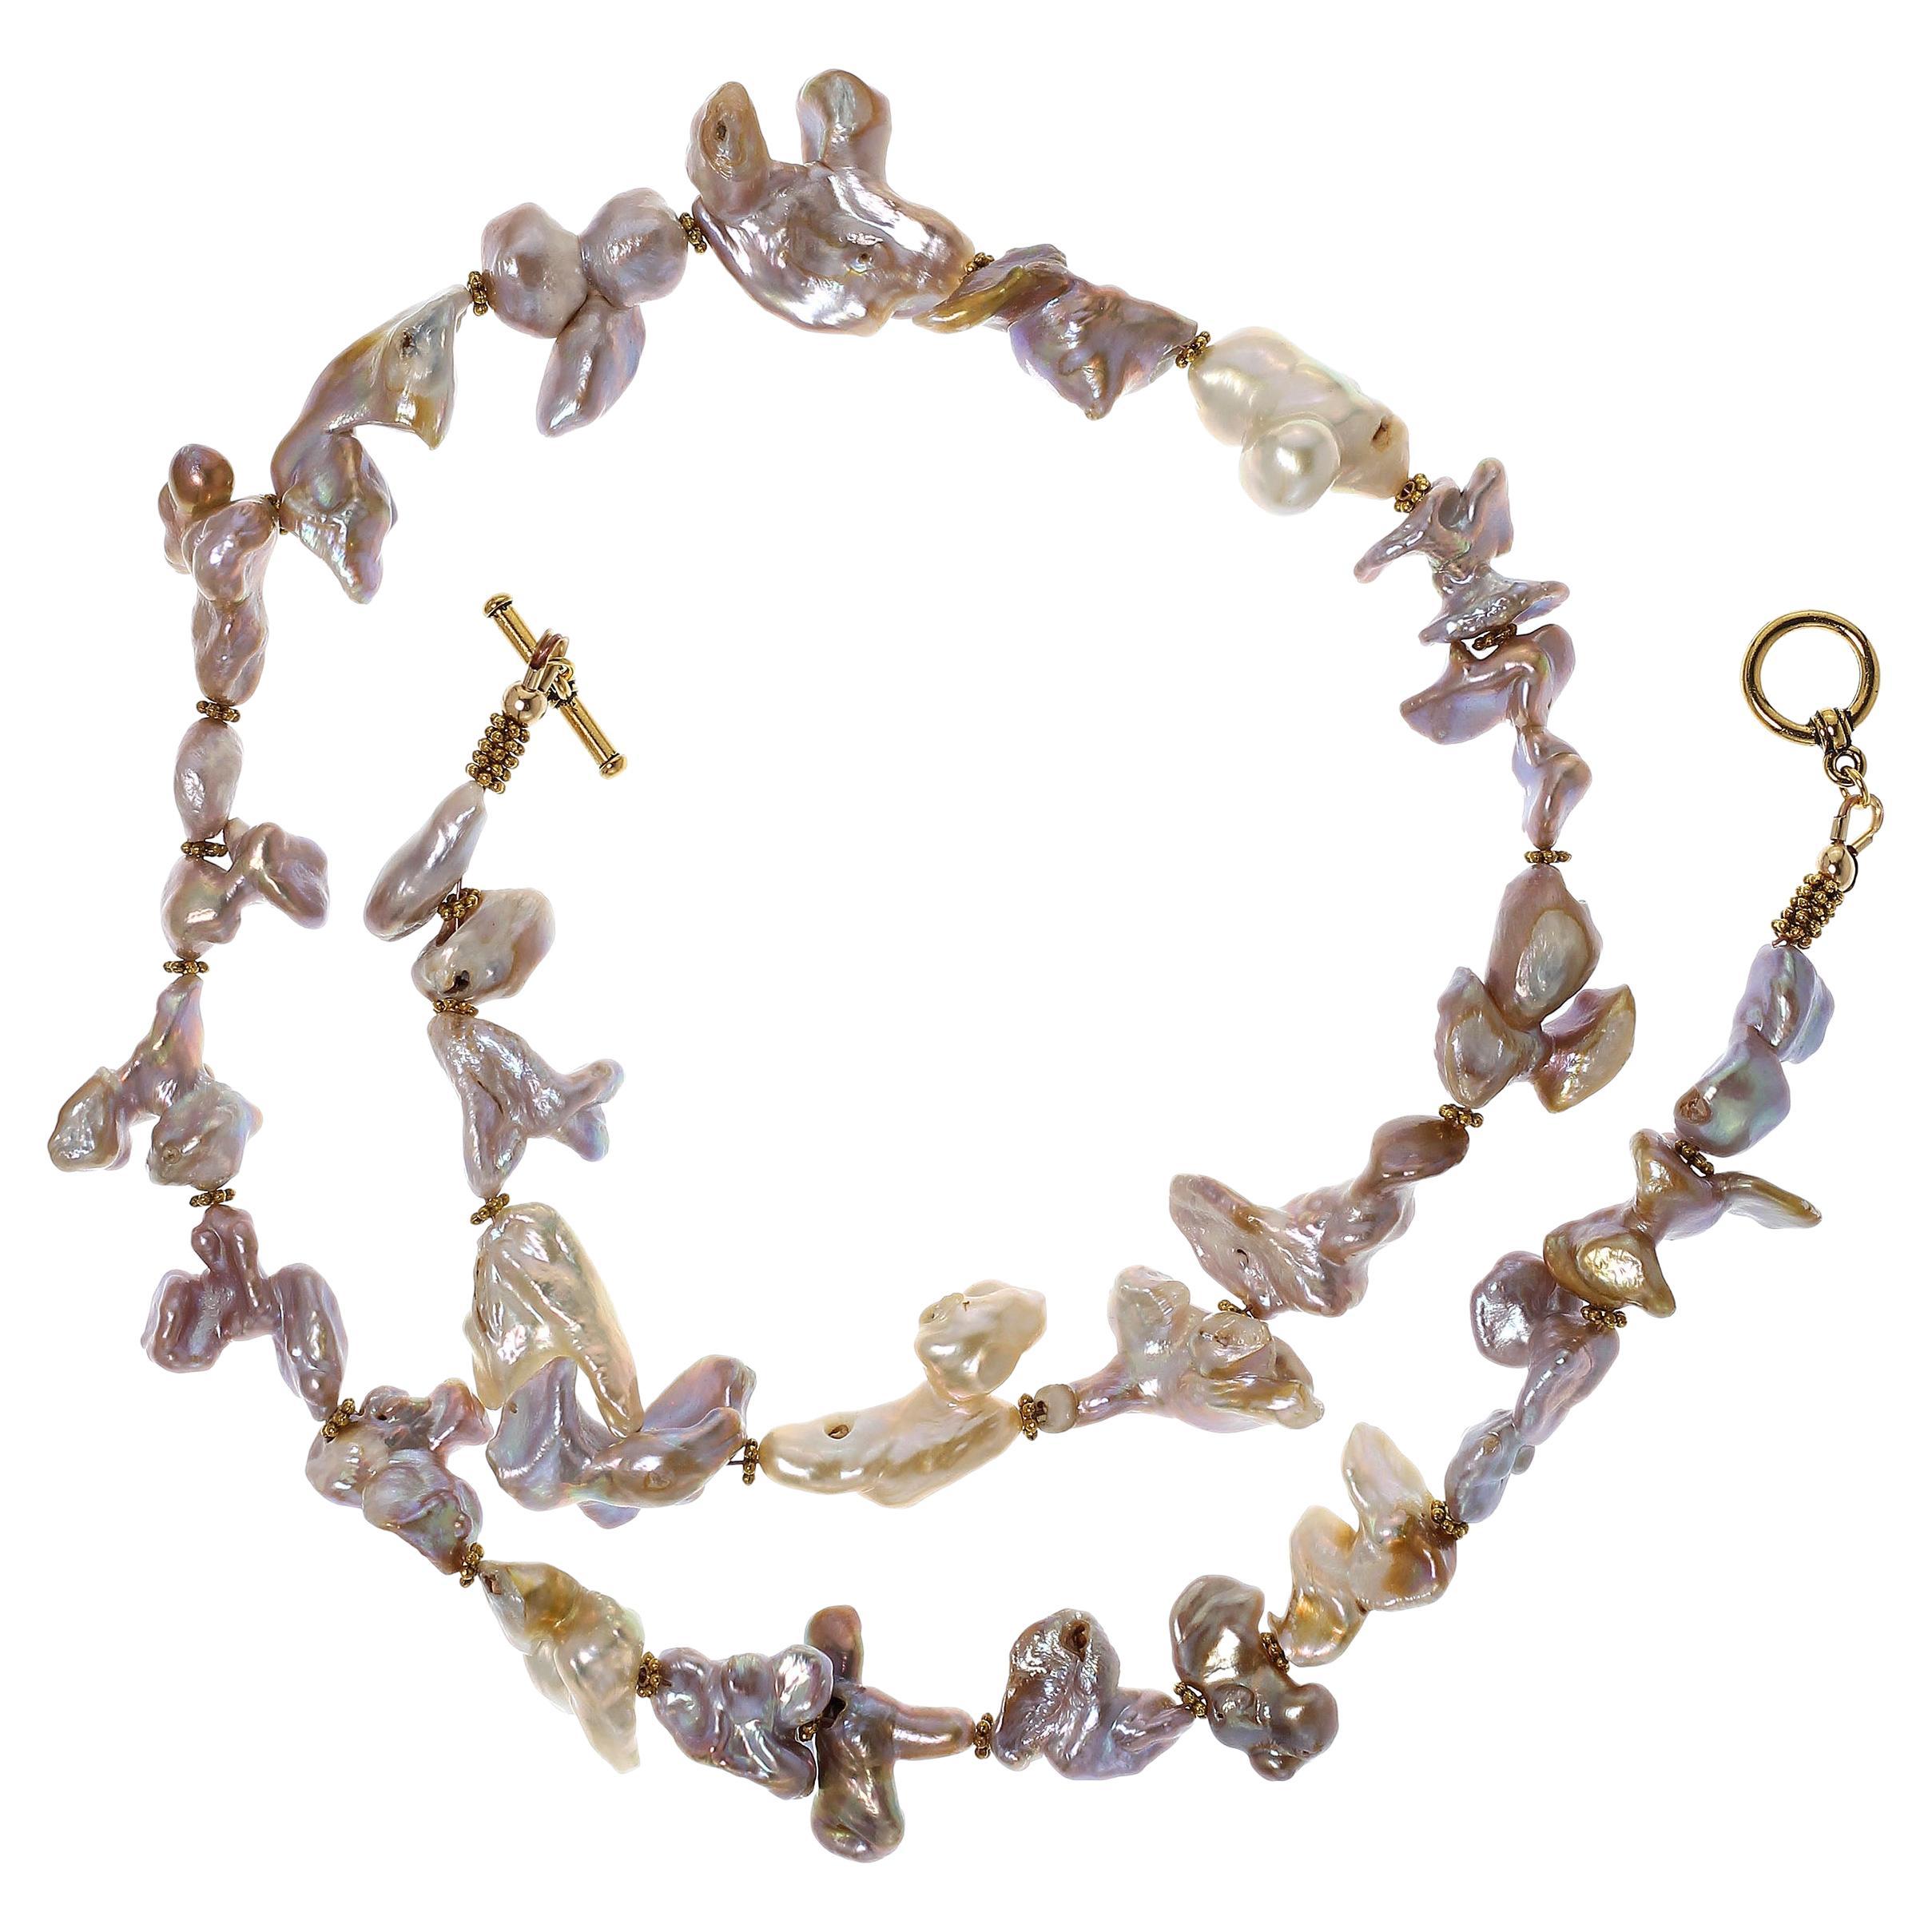 Own the pearls you deserve

This unique necklace is just the thing for anyone who loves beautiful unusually shaped pearls. They lovlies iridesce purple, pink, green, and a bit of yellow and some of them have beauty marks. We have accented these